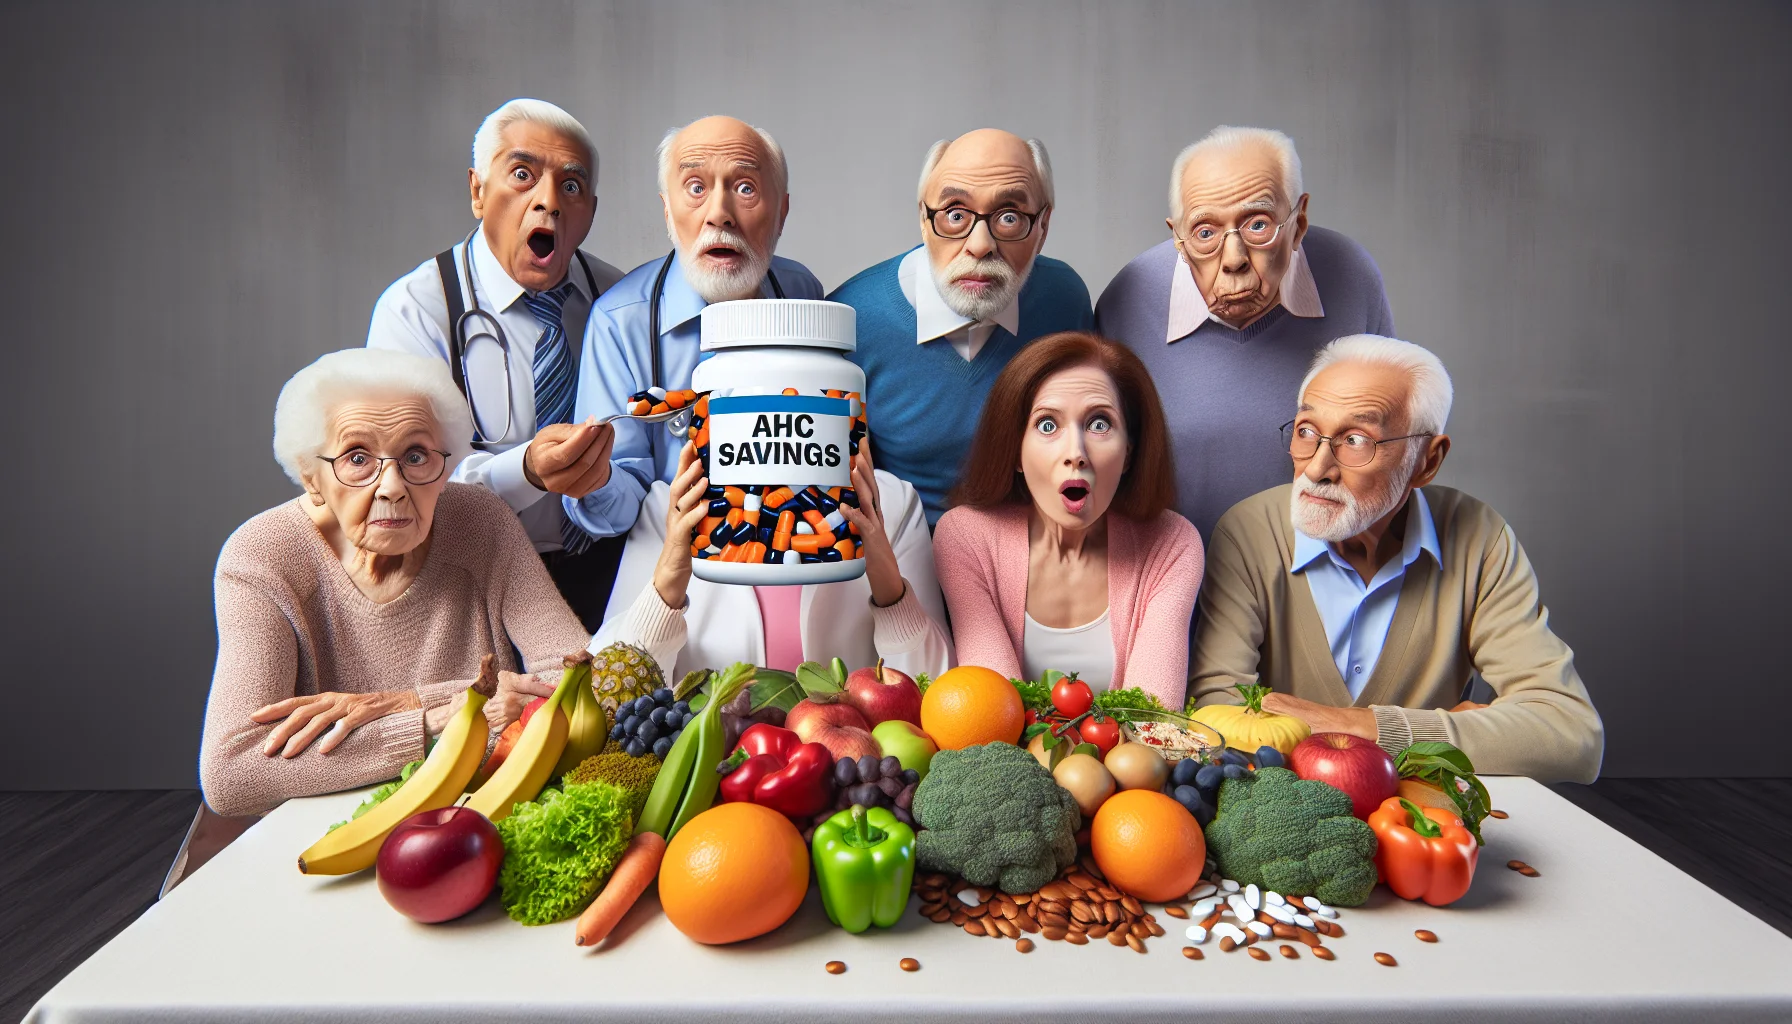 Create a humorous, realistic scene involving elderly individuals from various descents such as Caucasian, Middle-Eastern, and South Asian. They're all sitting around a table filled with healthy food - an array of colorful fruits, vegetables, grains and lean proteins. One of them is holding a huge pill bottle labeled 'AHC Savings' instead of a medication bottle, hinting that healthy eating is the best medicine. The expressions of surprise and amusement on their faces reflecting the humorous context, thus creating a light-hearted wink towards the costs and benefits of maintaining a healthy diet in old age.